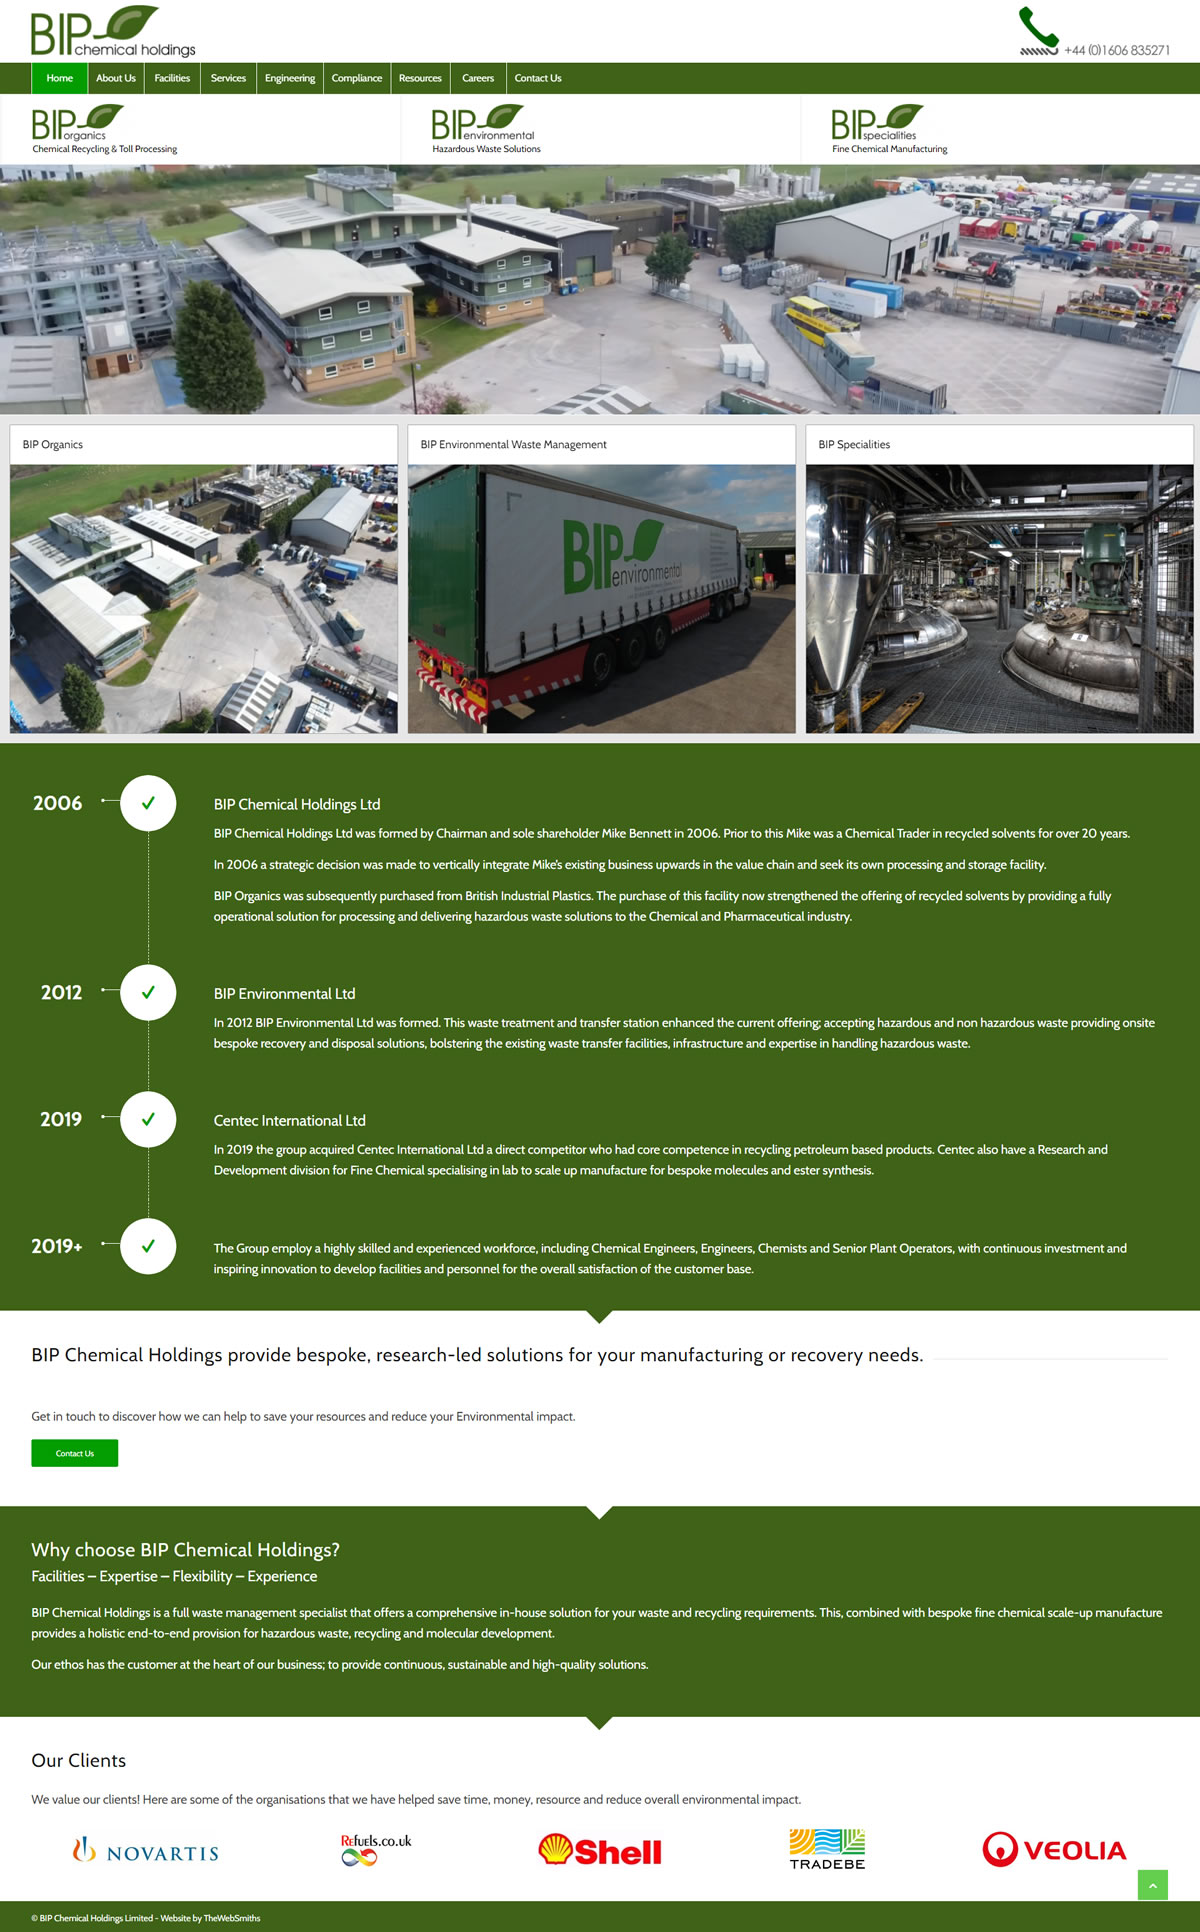 A new website for BIP Chemical Holdings